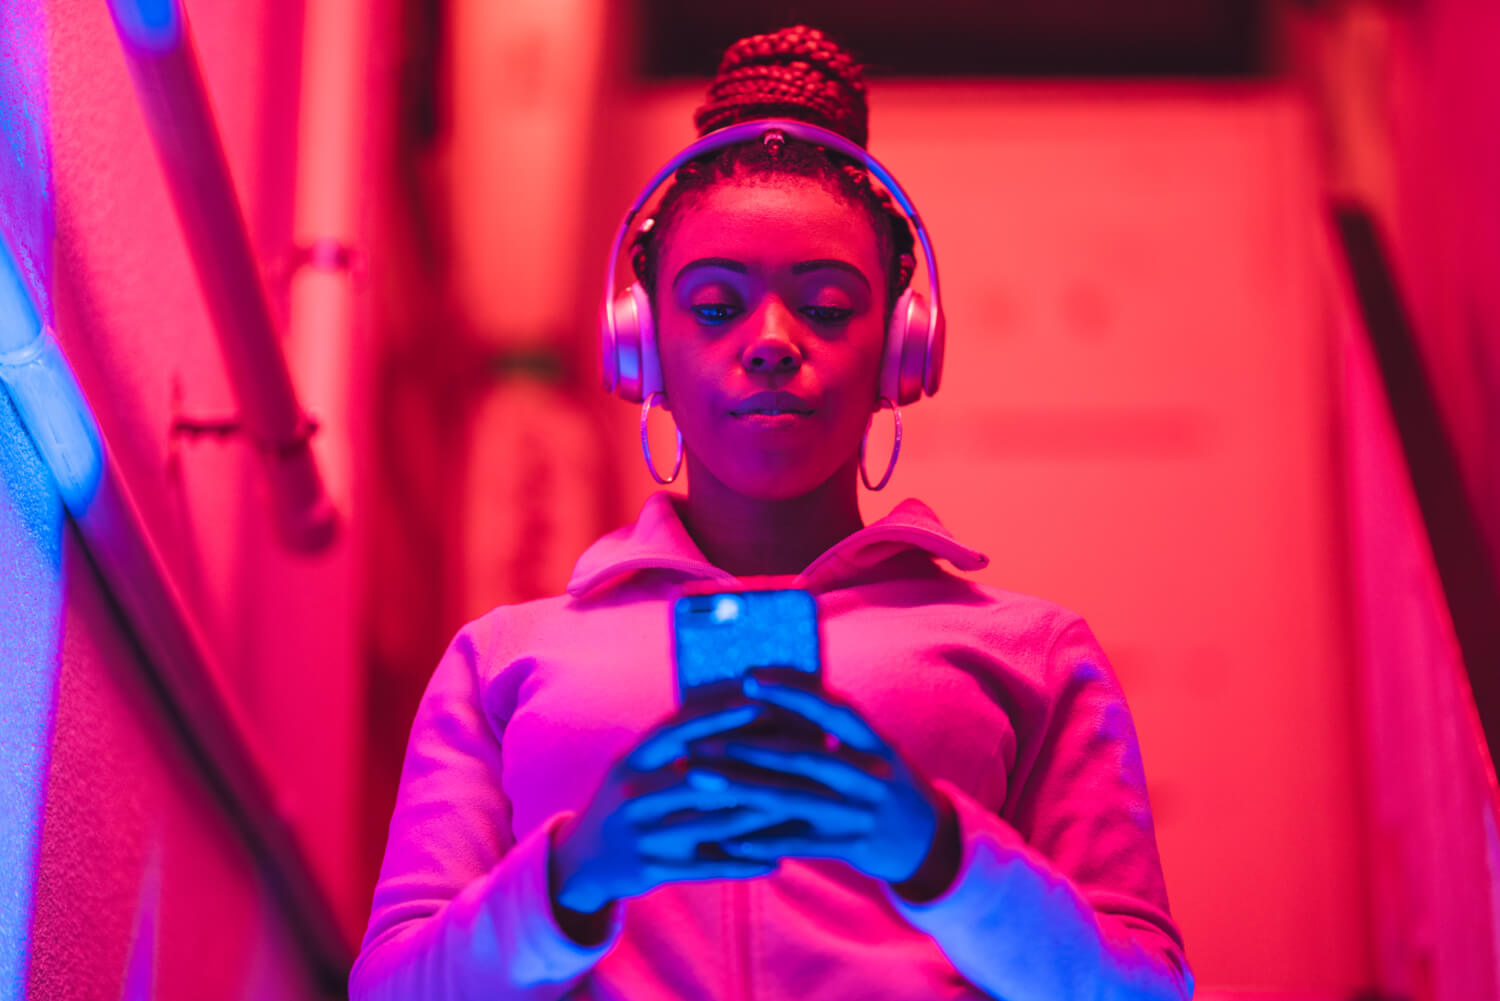 Portrait of young black woman listening to music under neon lights